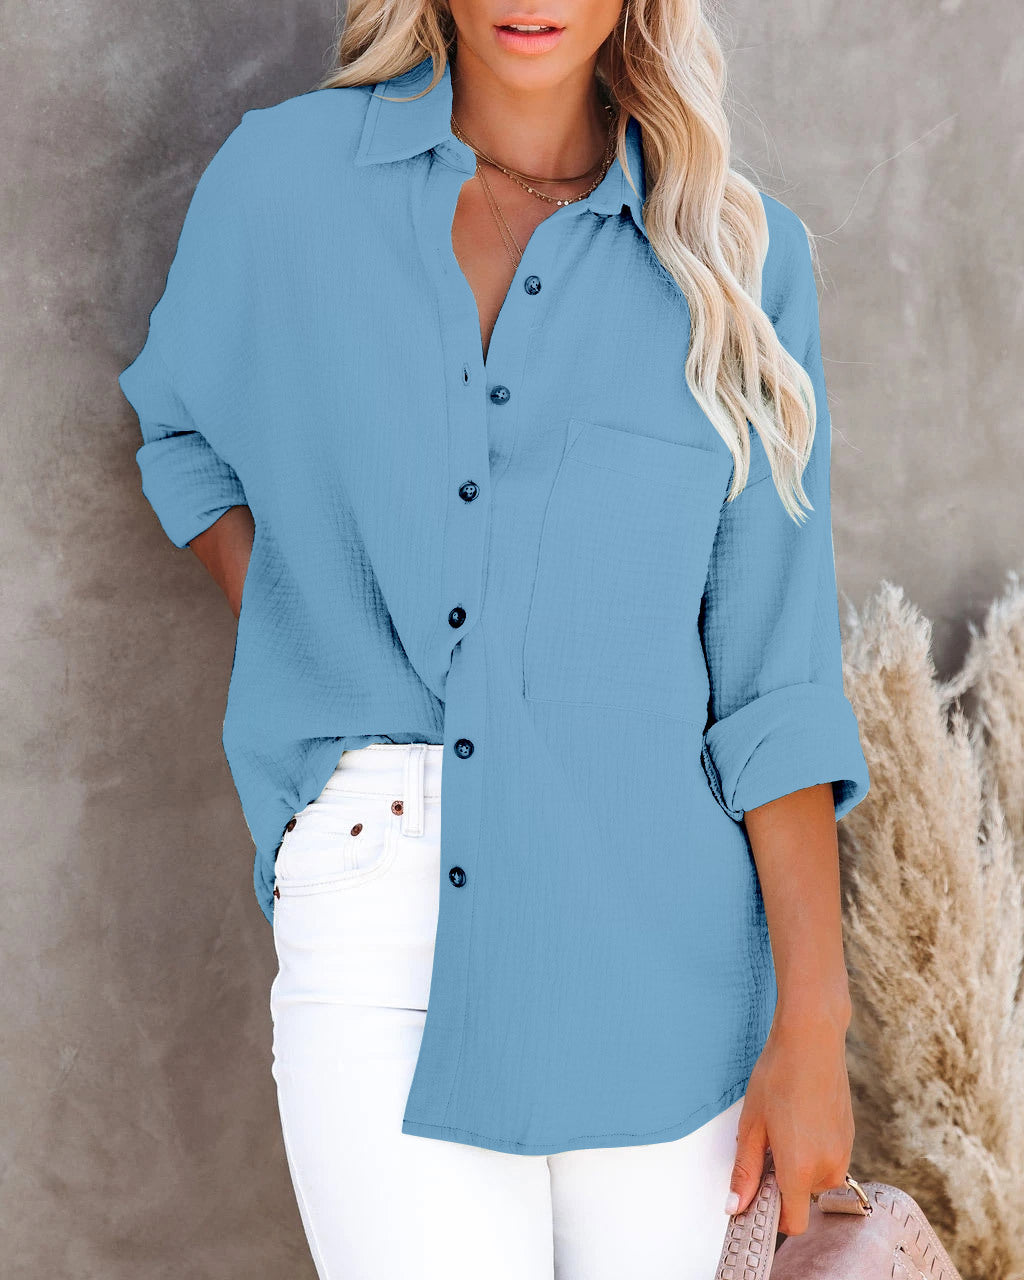 Simple Long Sleeve V Neck Button Ladies Cotton Linen Shirt Women's Clothing - Ricky's Garage